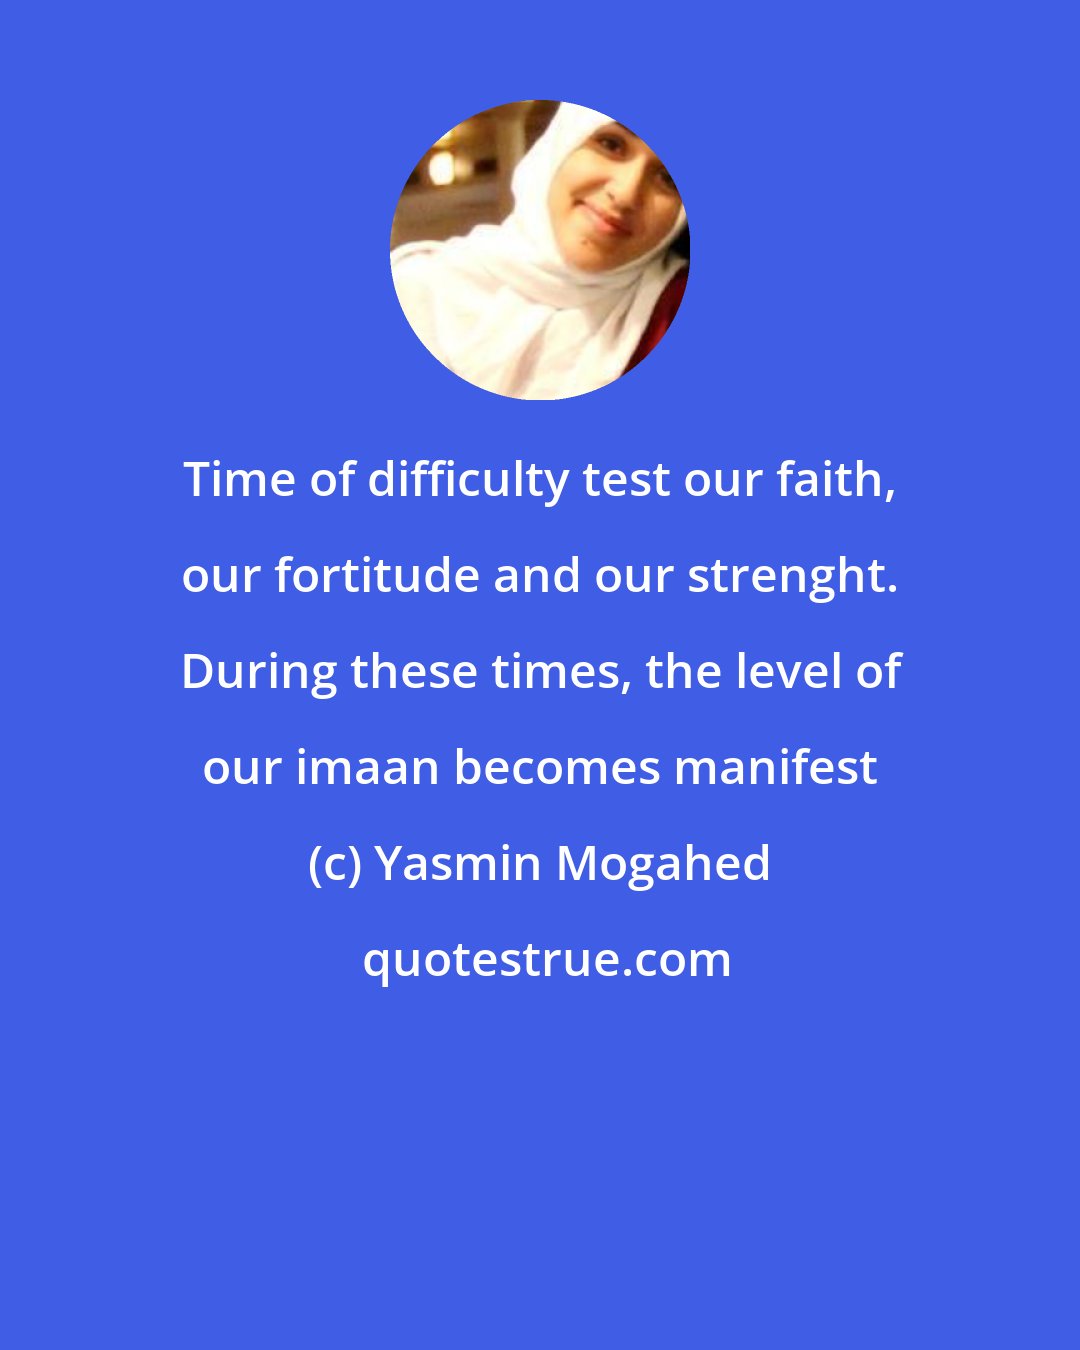 Yasmin Mogahed: Time of difficulty test our faith, our fortitude and our strenght. During these times, the level of our imaan becomes manifest